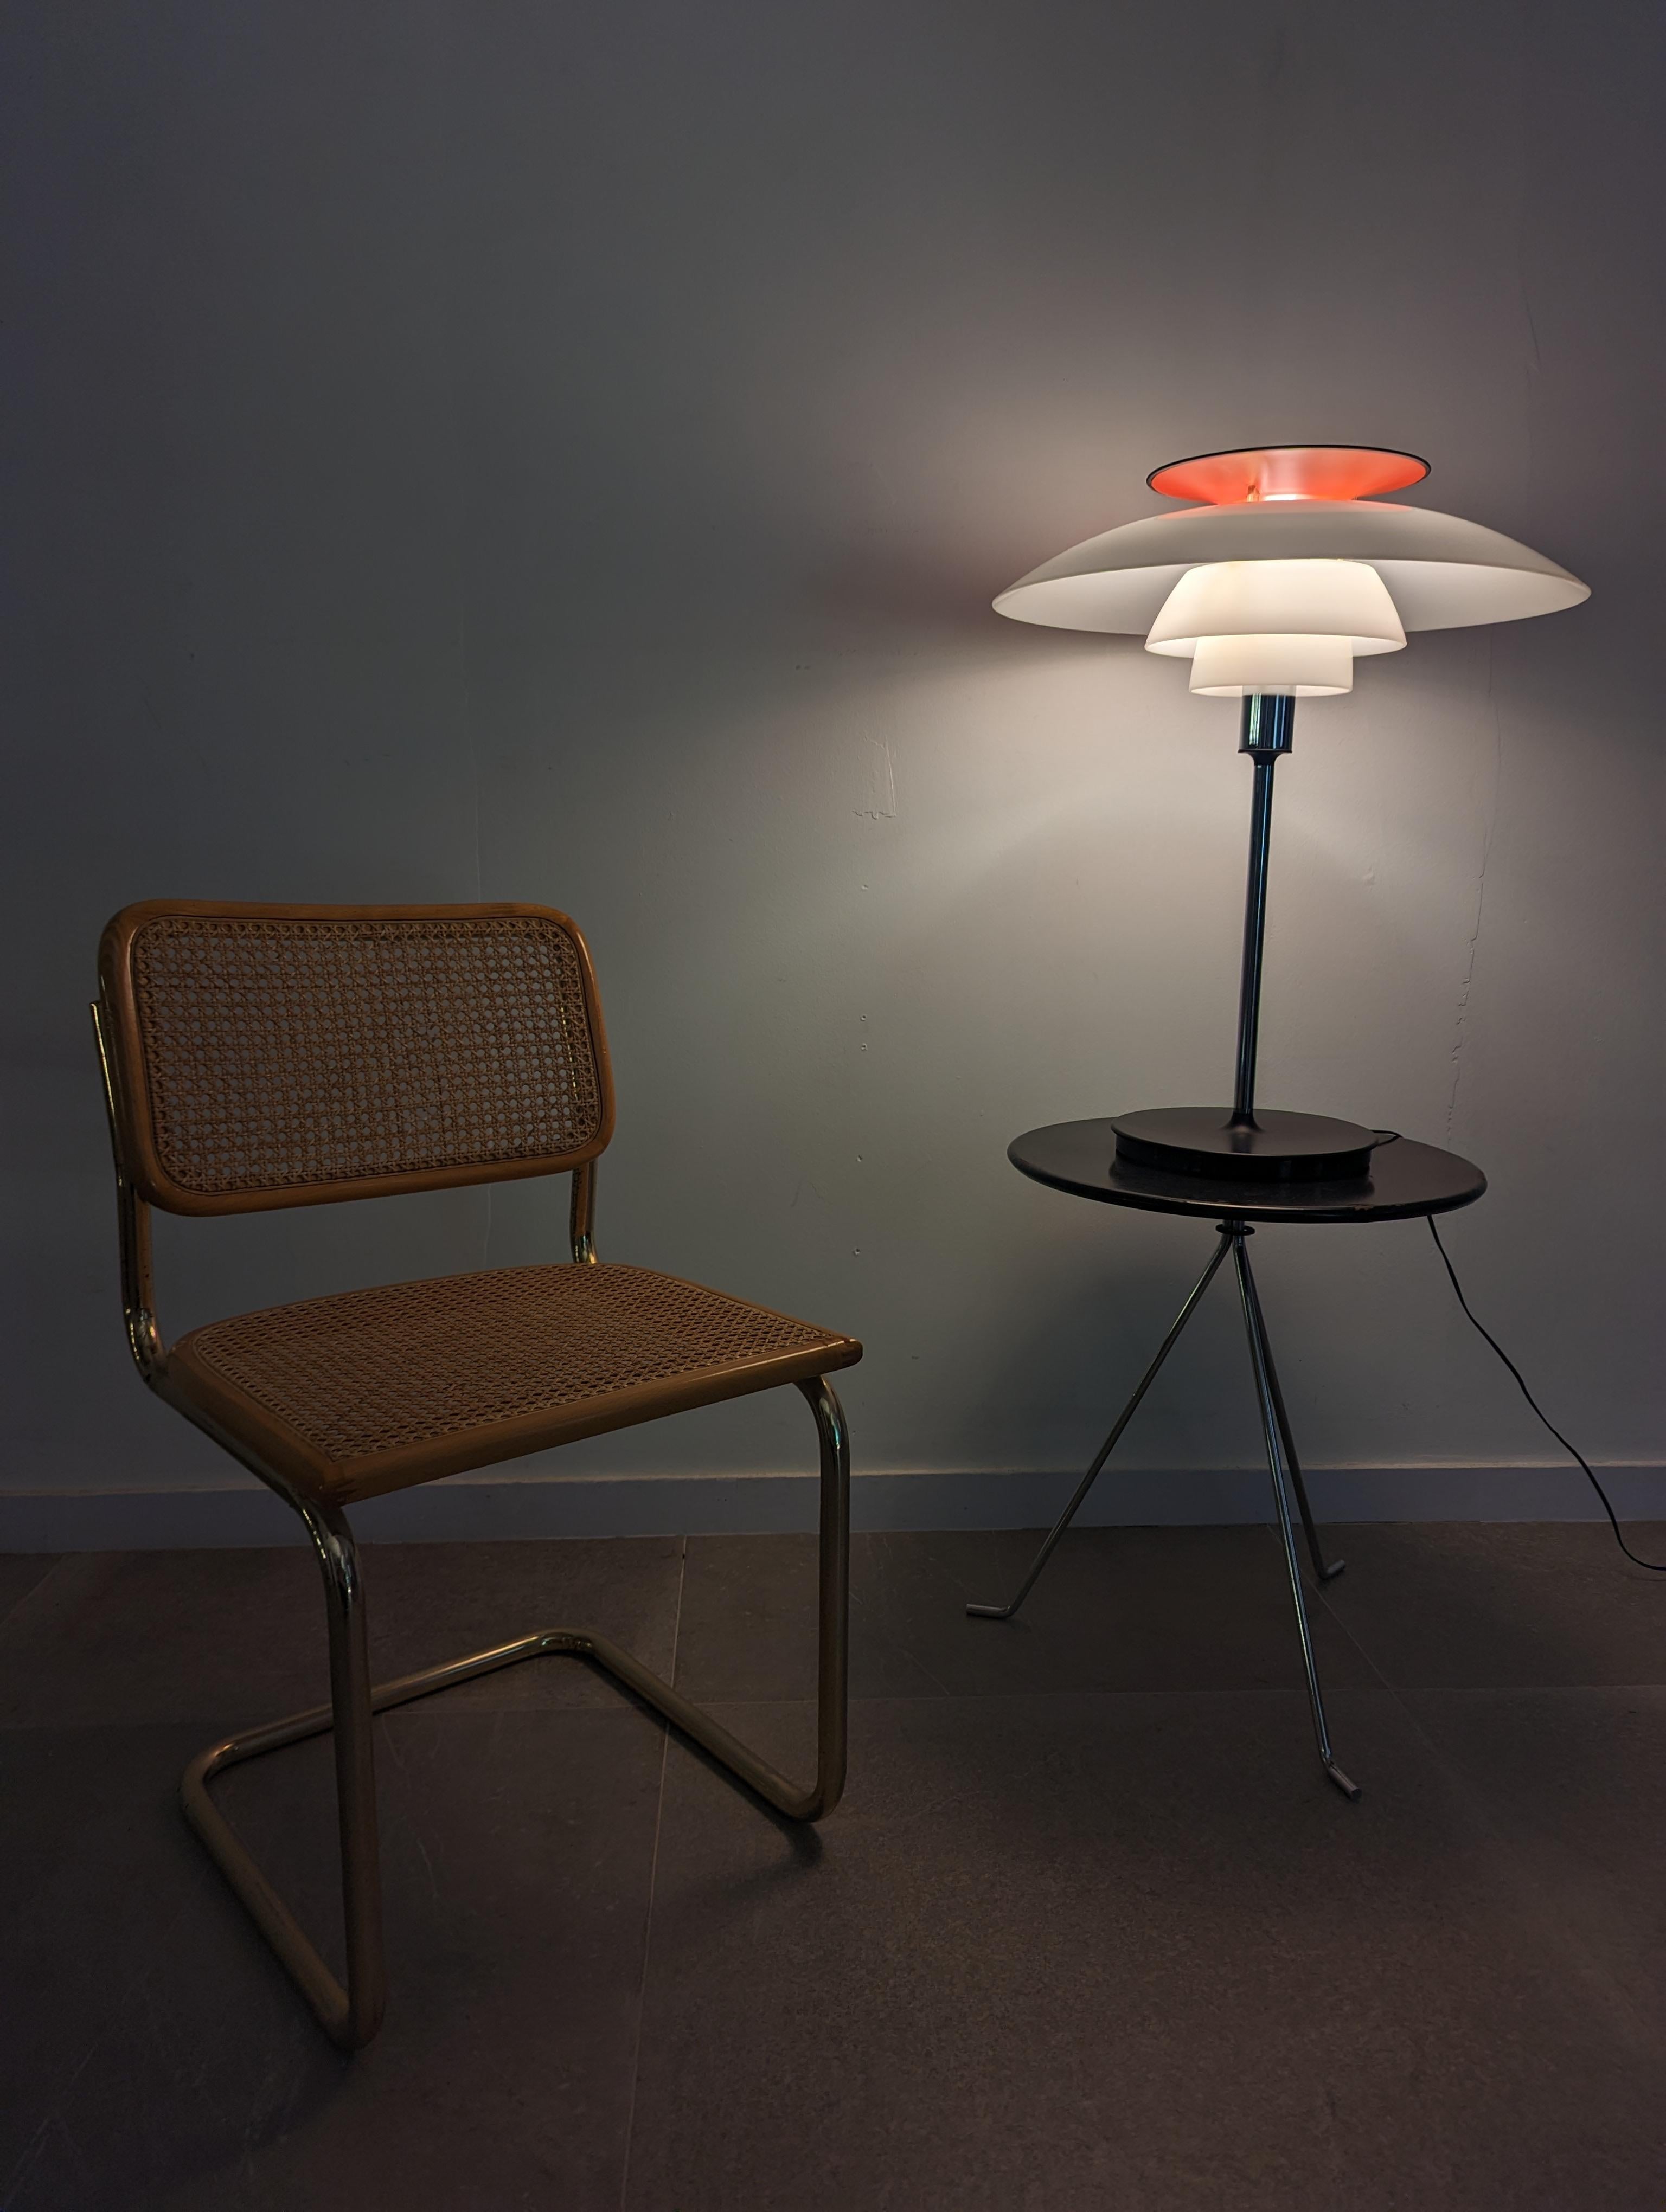 Discover the iconic Vintage Ph 80 Table Lamp by Poul Henningsen for Louis Poulsen from the 1980s on 1stdibs. A treasure of Scandinavian design, this collector's item combines timeless elegance with exceptional functionality. Created by the renowned